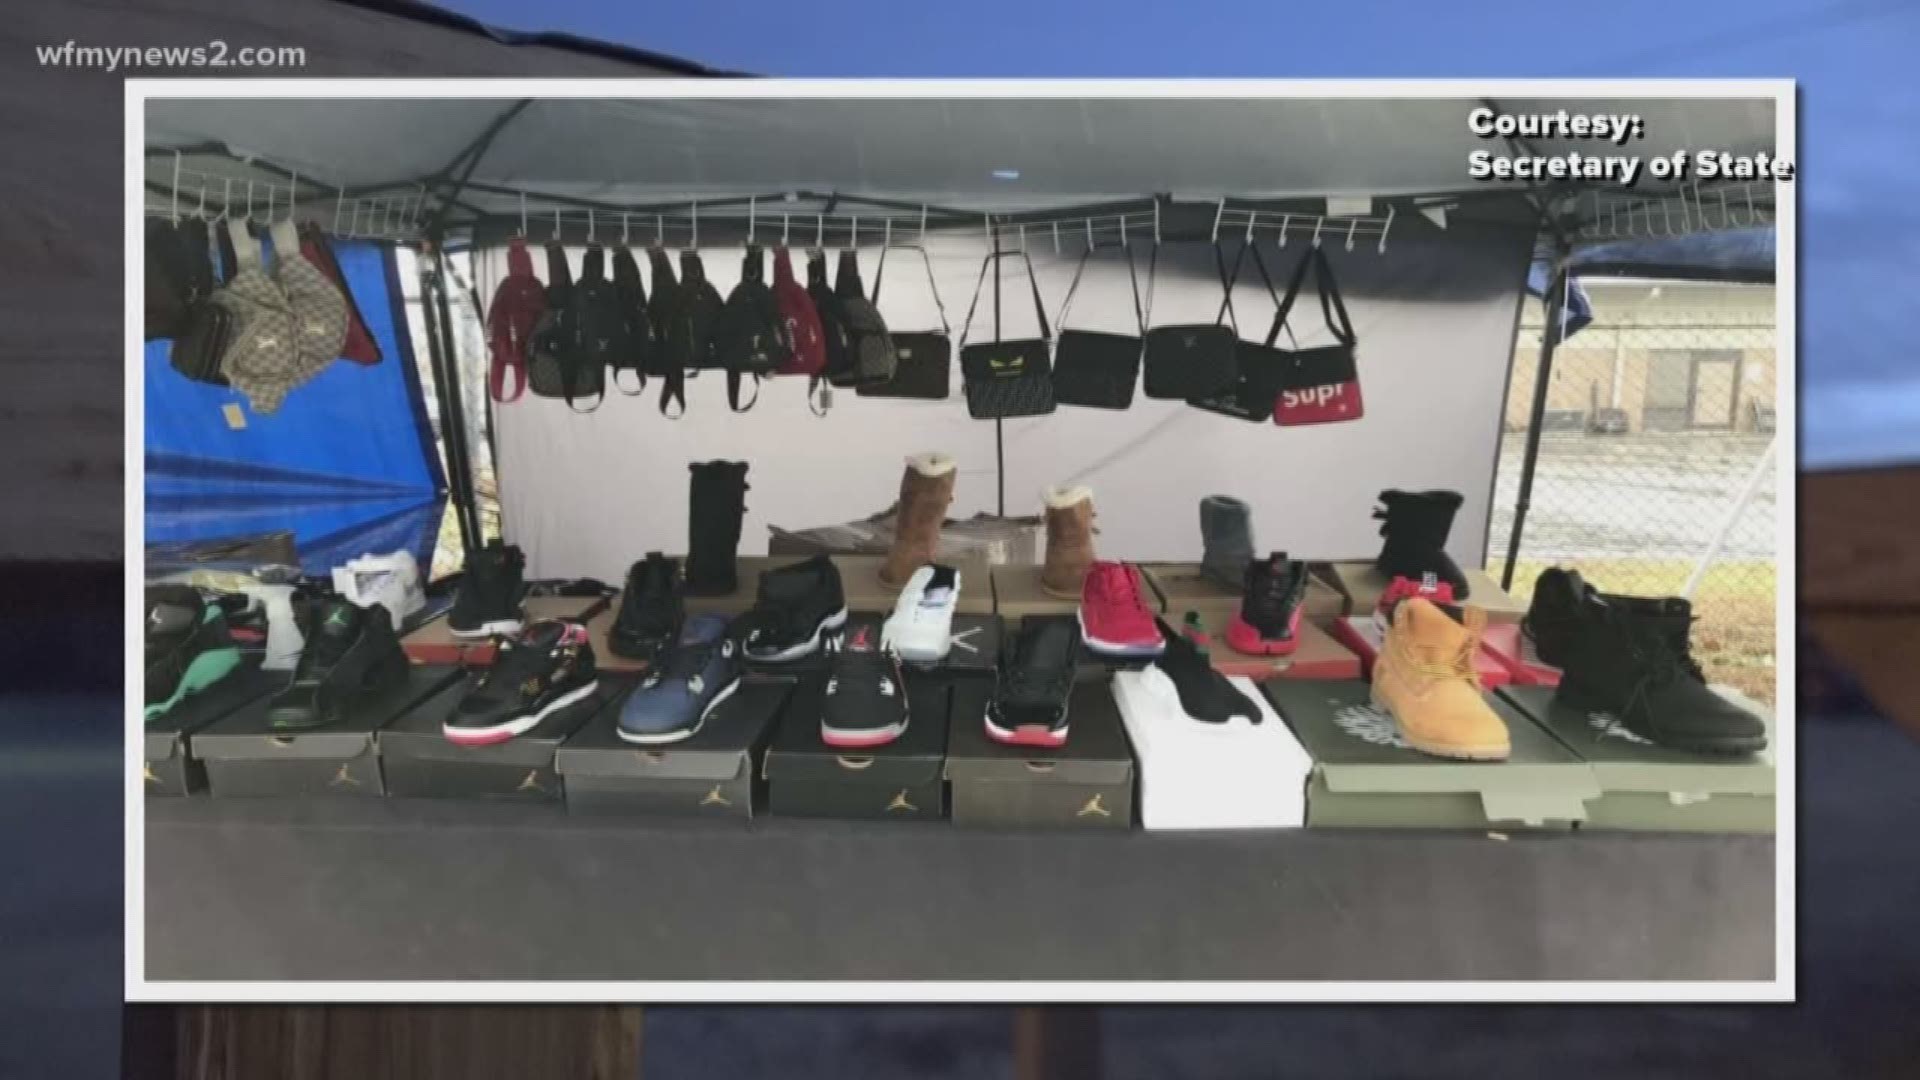 Fake Air Jordans, Ugg boots, Rolex watches, Gucci handbags and pirated CDs and DVDs.
All had an estimated retail value of $460,000.